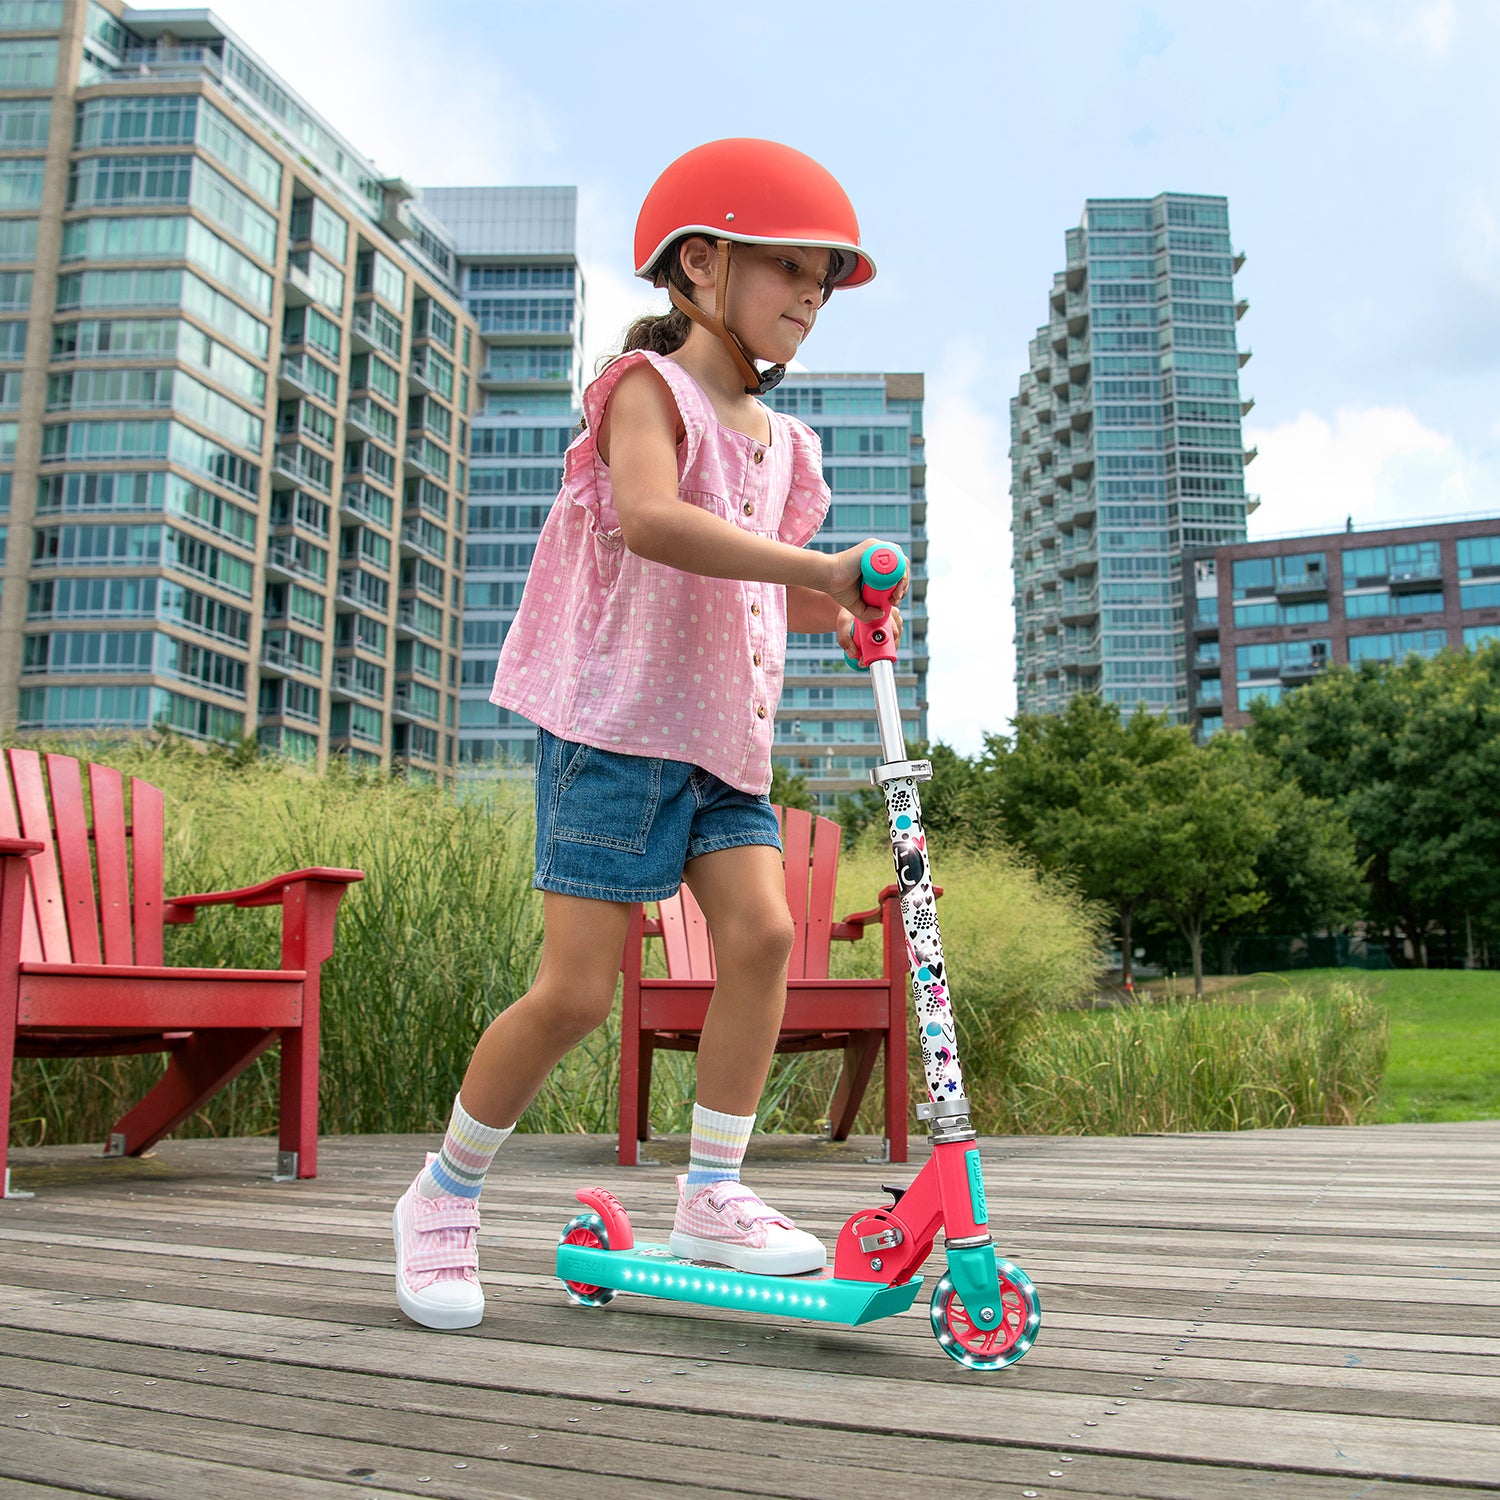 young girl riding the gabby's dollhouse kick scooter